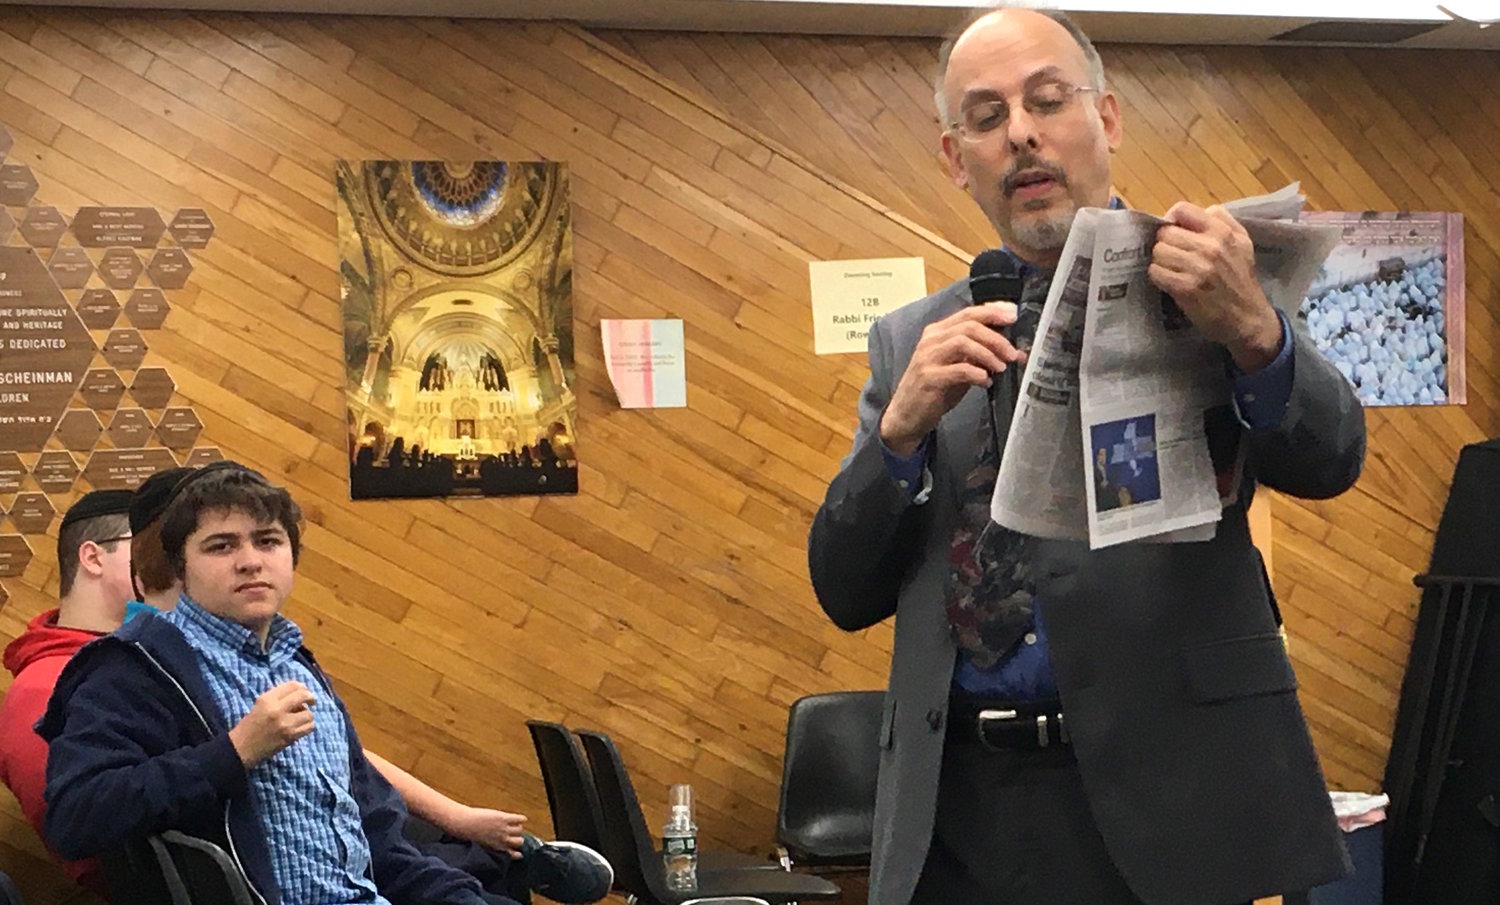 Dr. Rafael Medoff tells students at Rambam HS how newspapers downplayed news of the Shoah as the genocide unfolded.